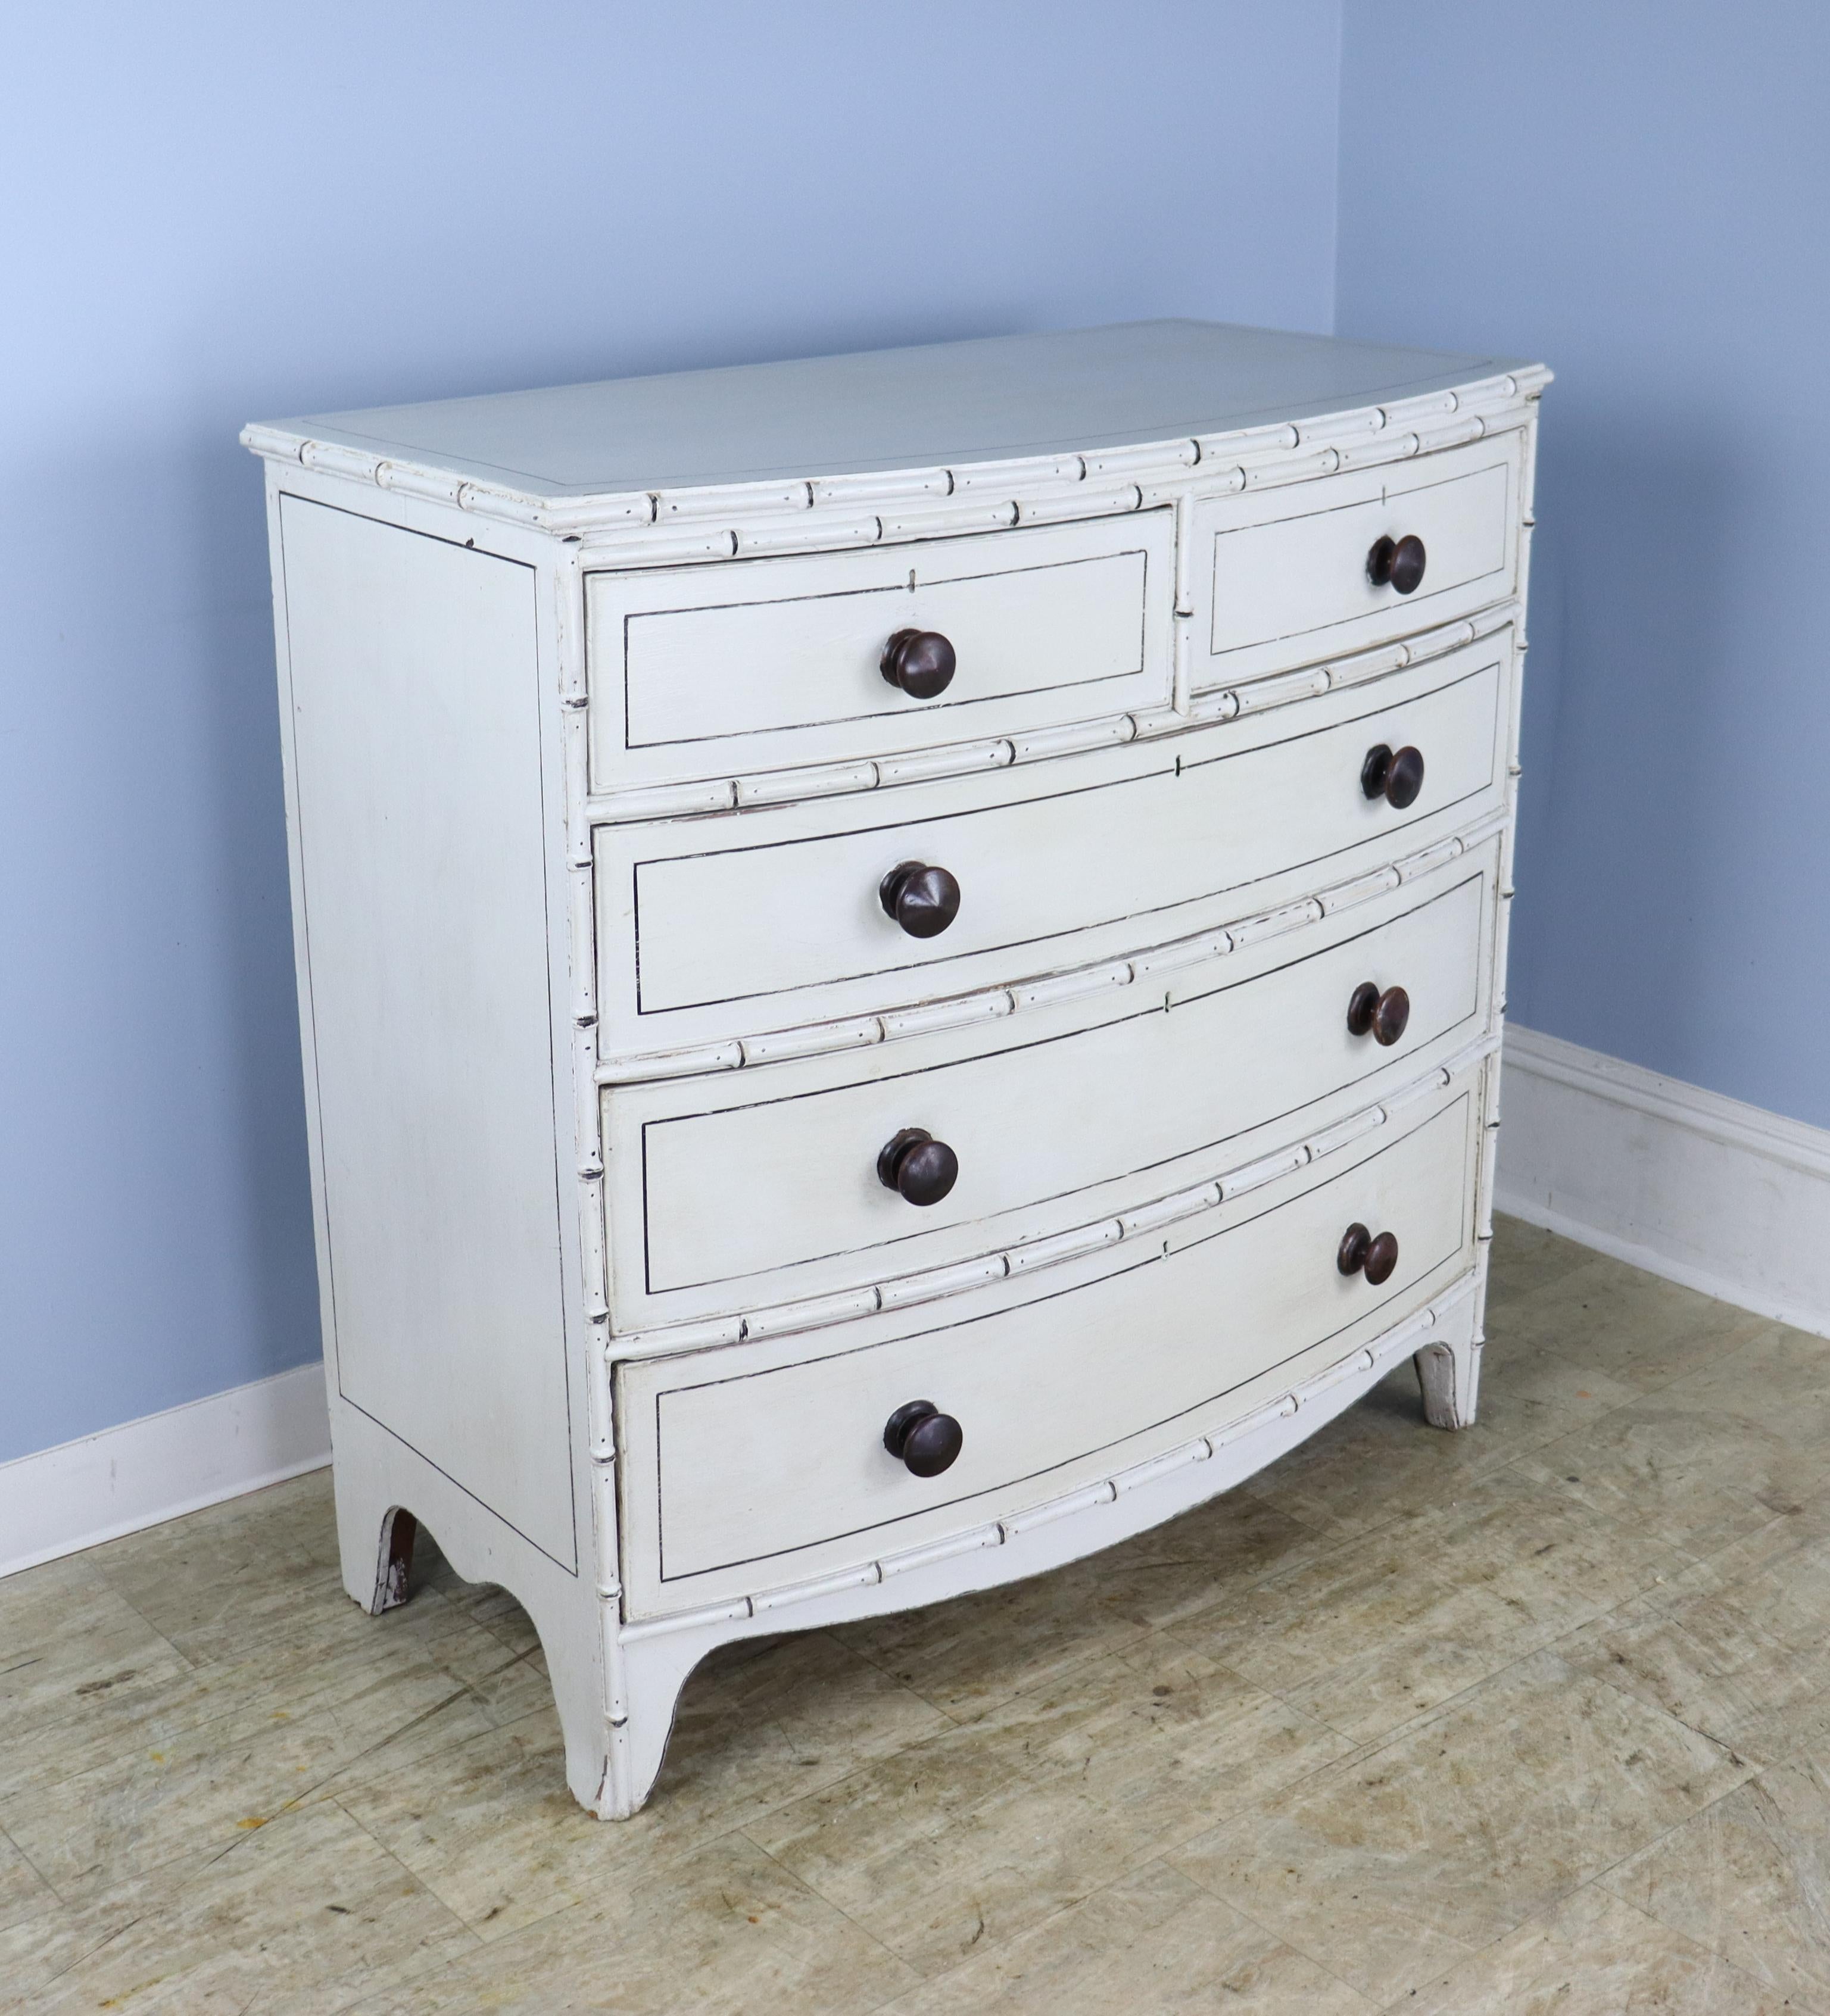 A charming Regency bowfront chest of drawers with bamboo detail, newly painted in an antique creamy white, finished with beeswax to create a faux distressed effect. Perfectly suited to a beach cottage, child's room or guest room. Roomy drawers open